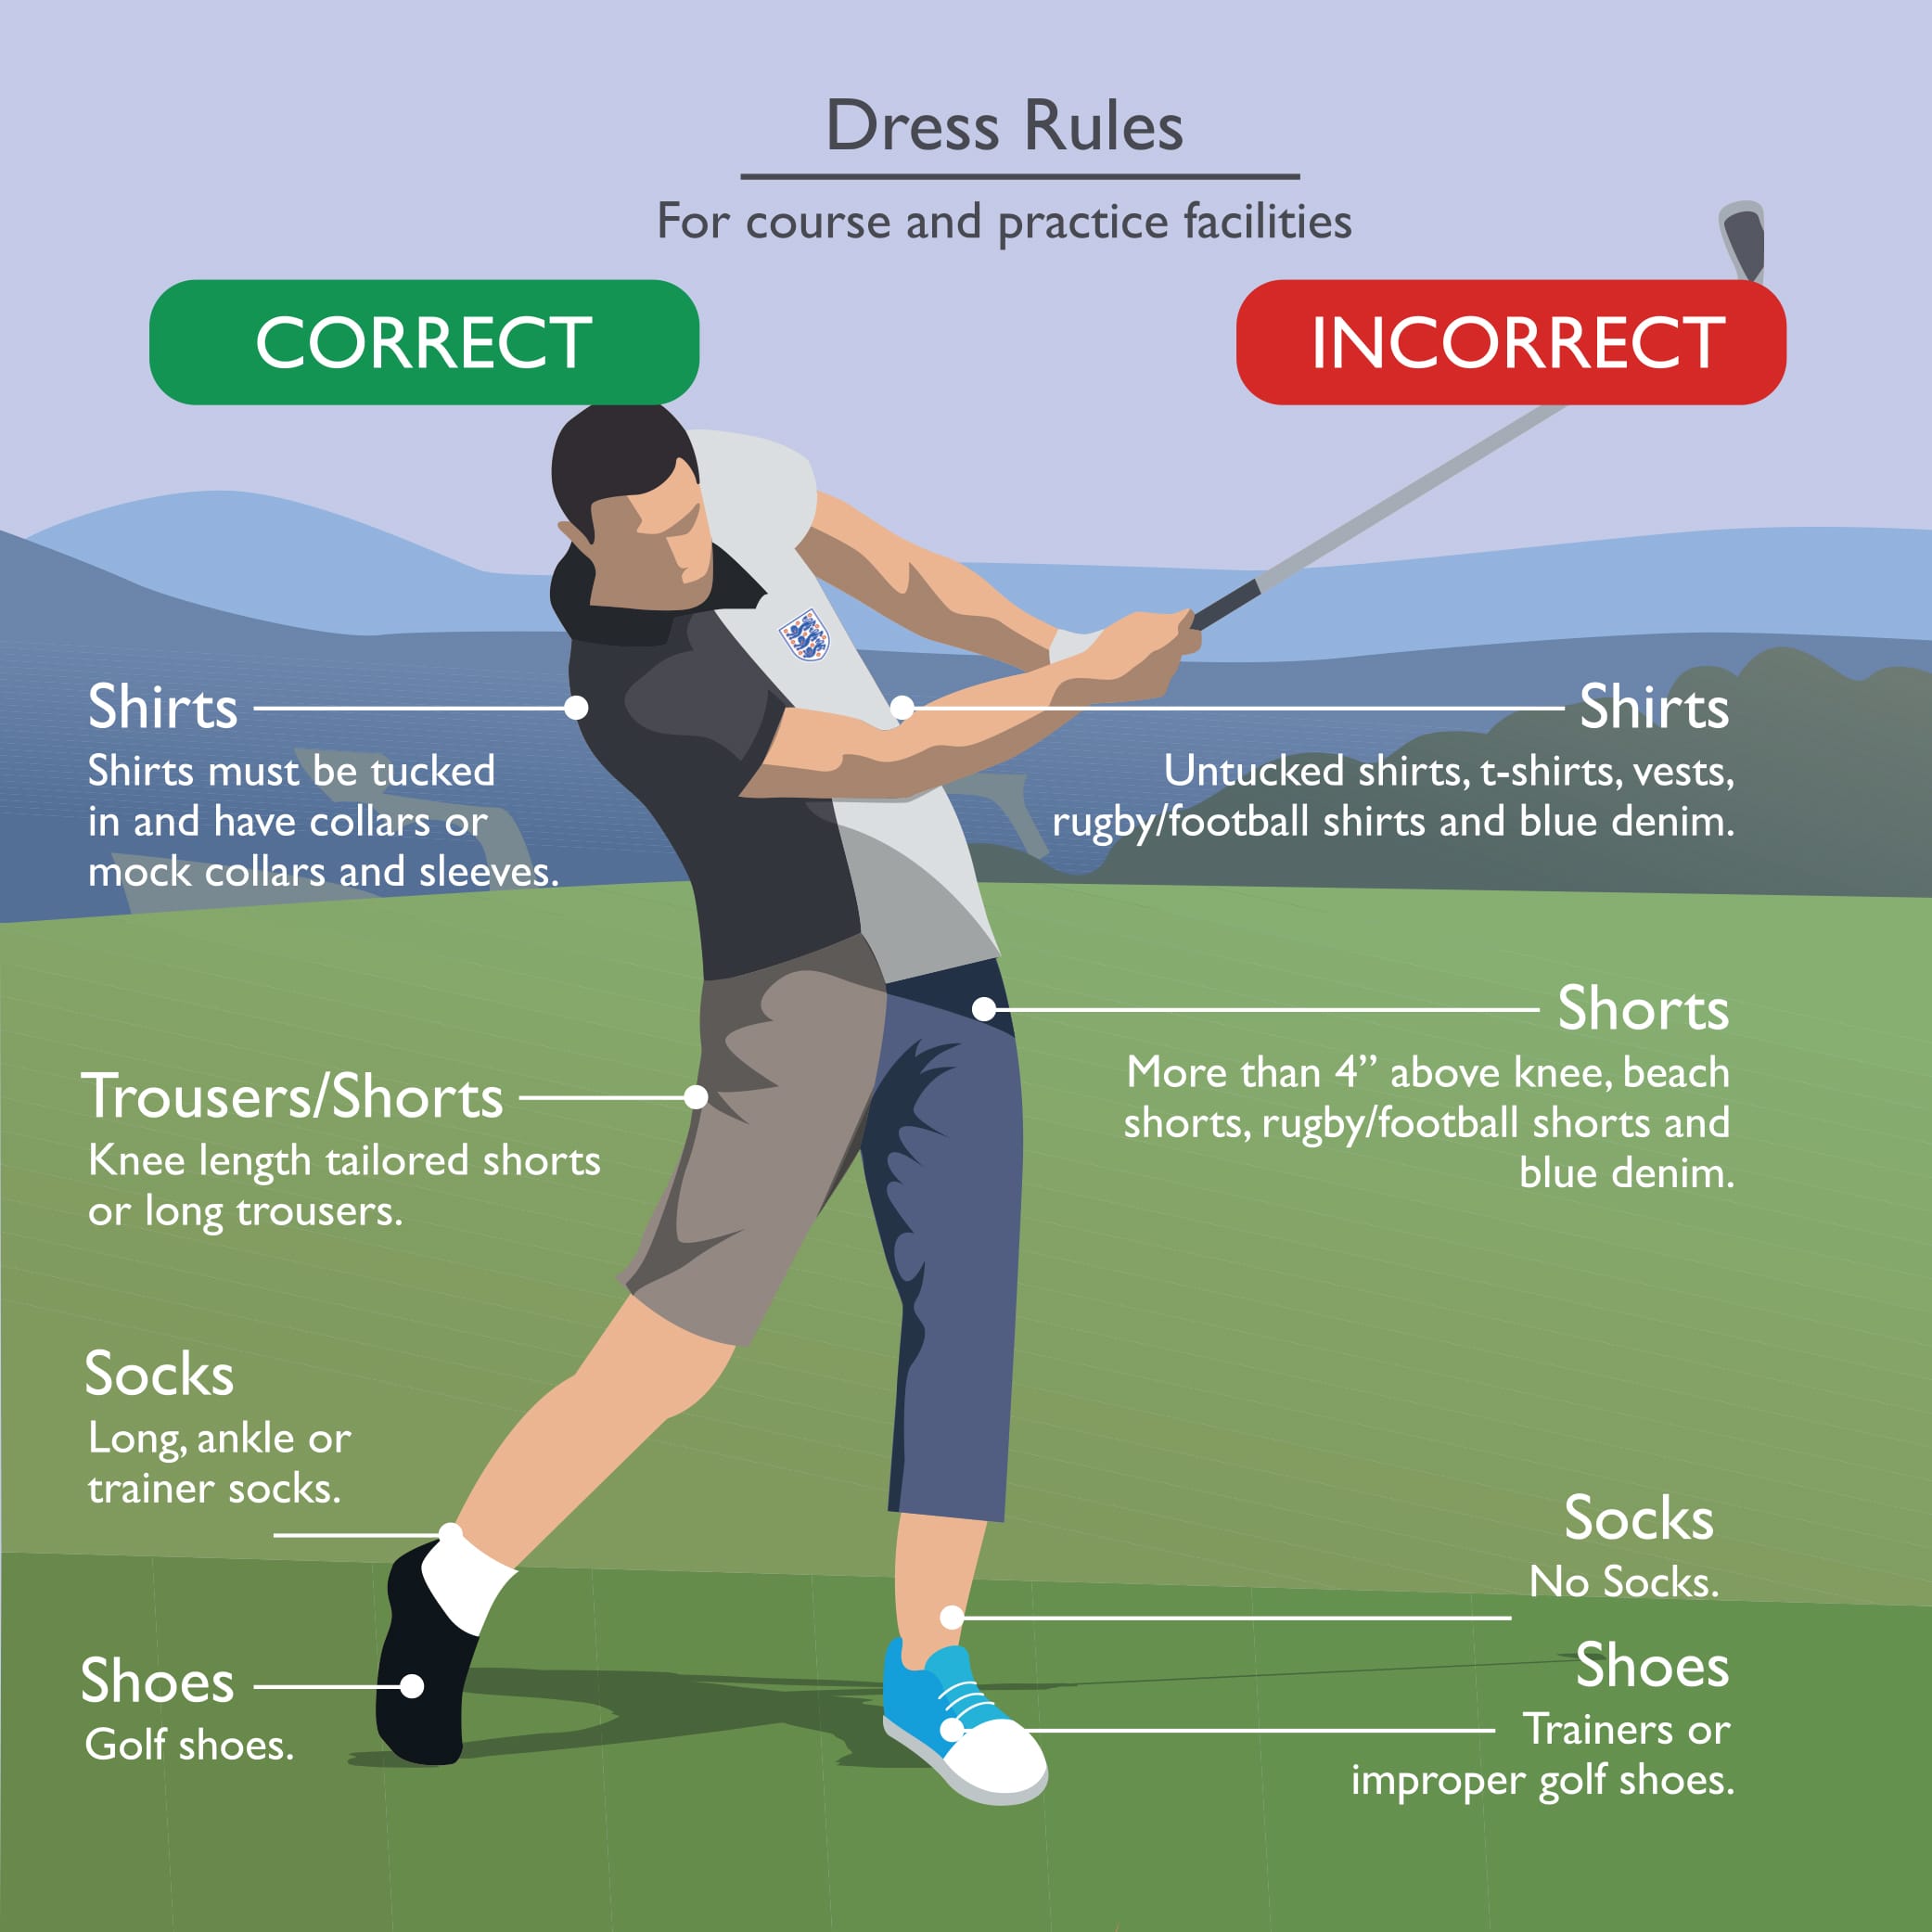 Course Etiquette - Course Rules & Golf Dress Code | Stoke by Nayland